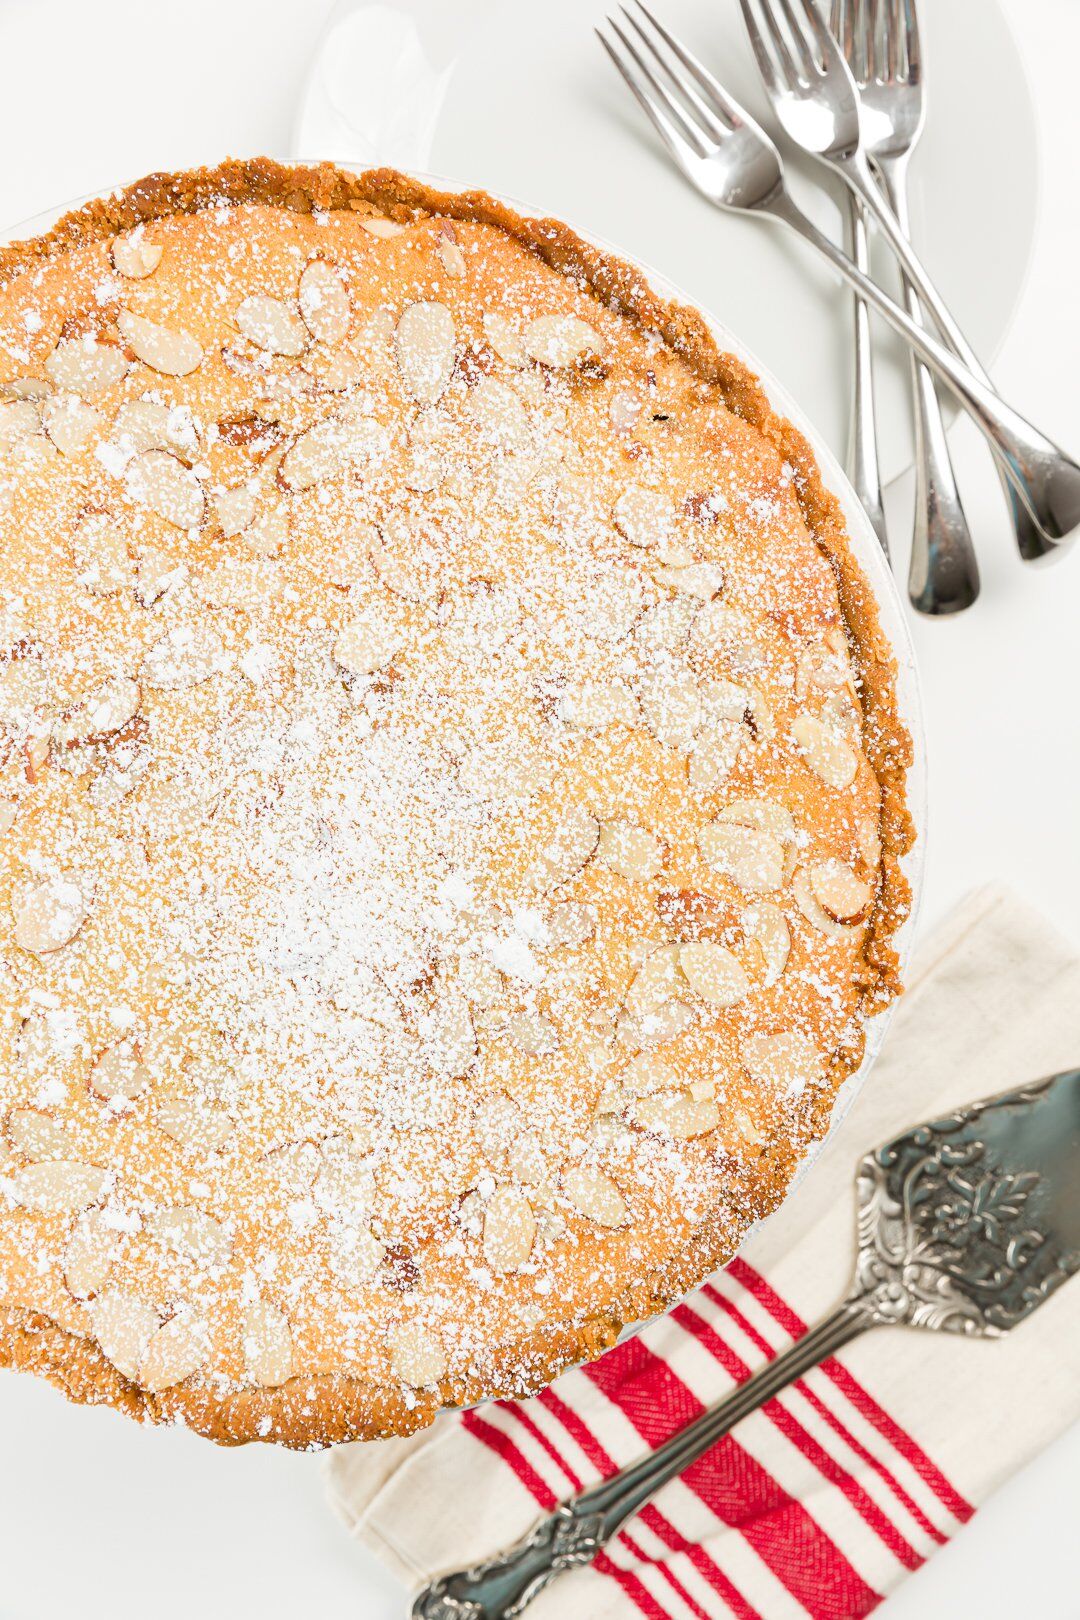 overhead shot of cooked tart dusted with powdered sugar with a cake server next to it on a striped napkin